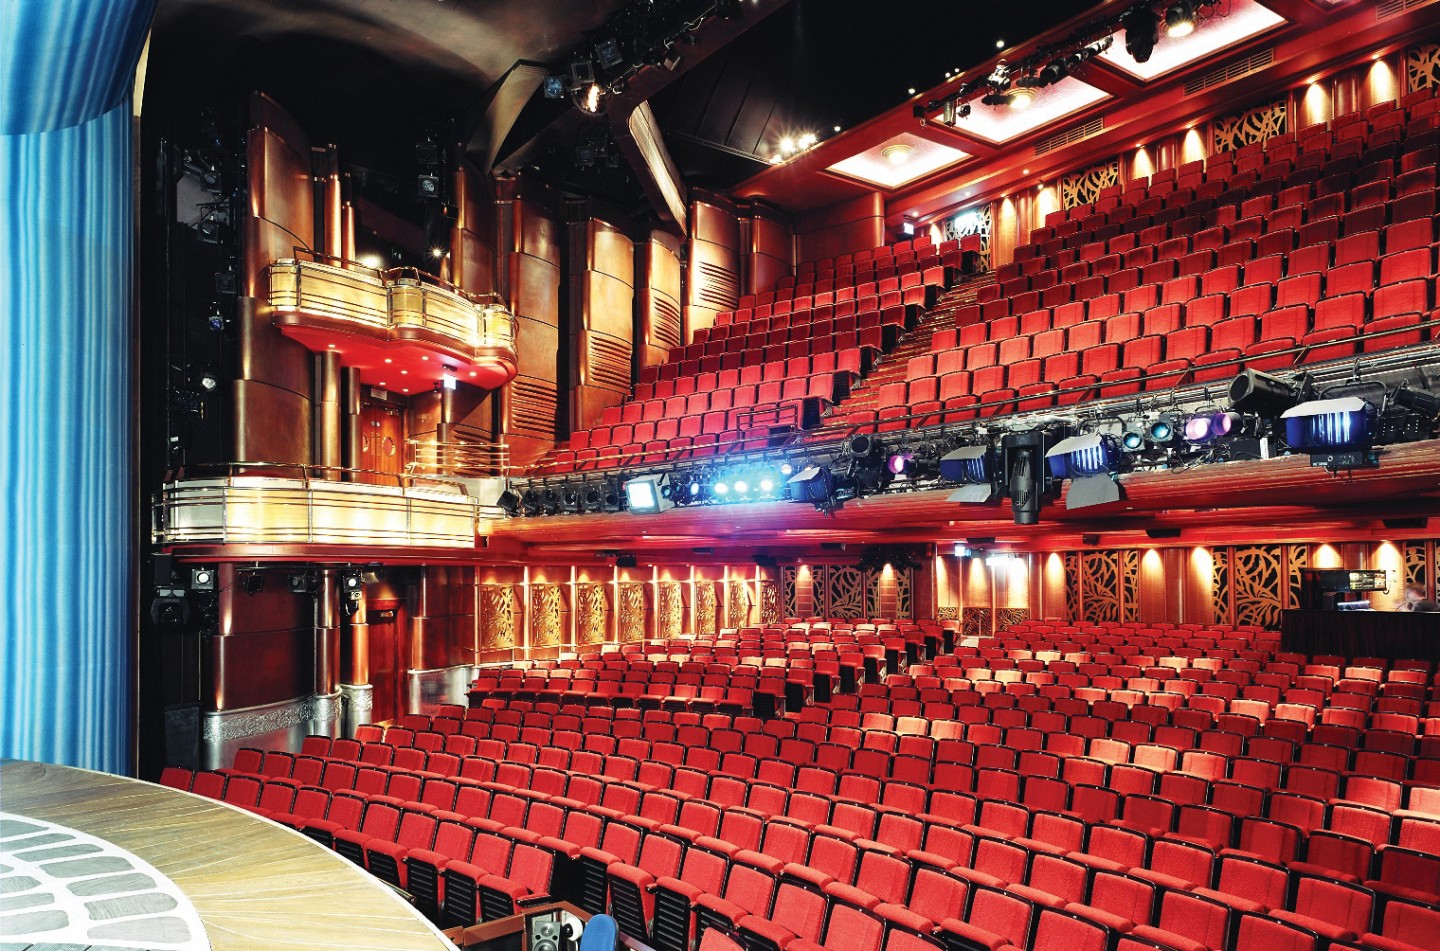 Inside the Prince of Wales theatre